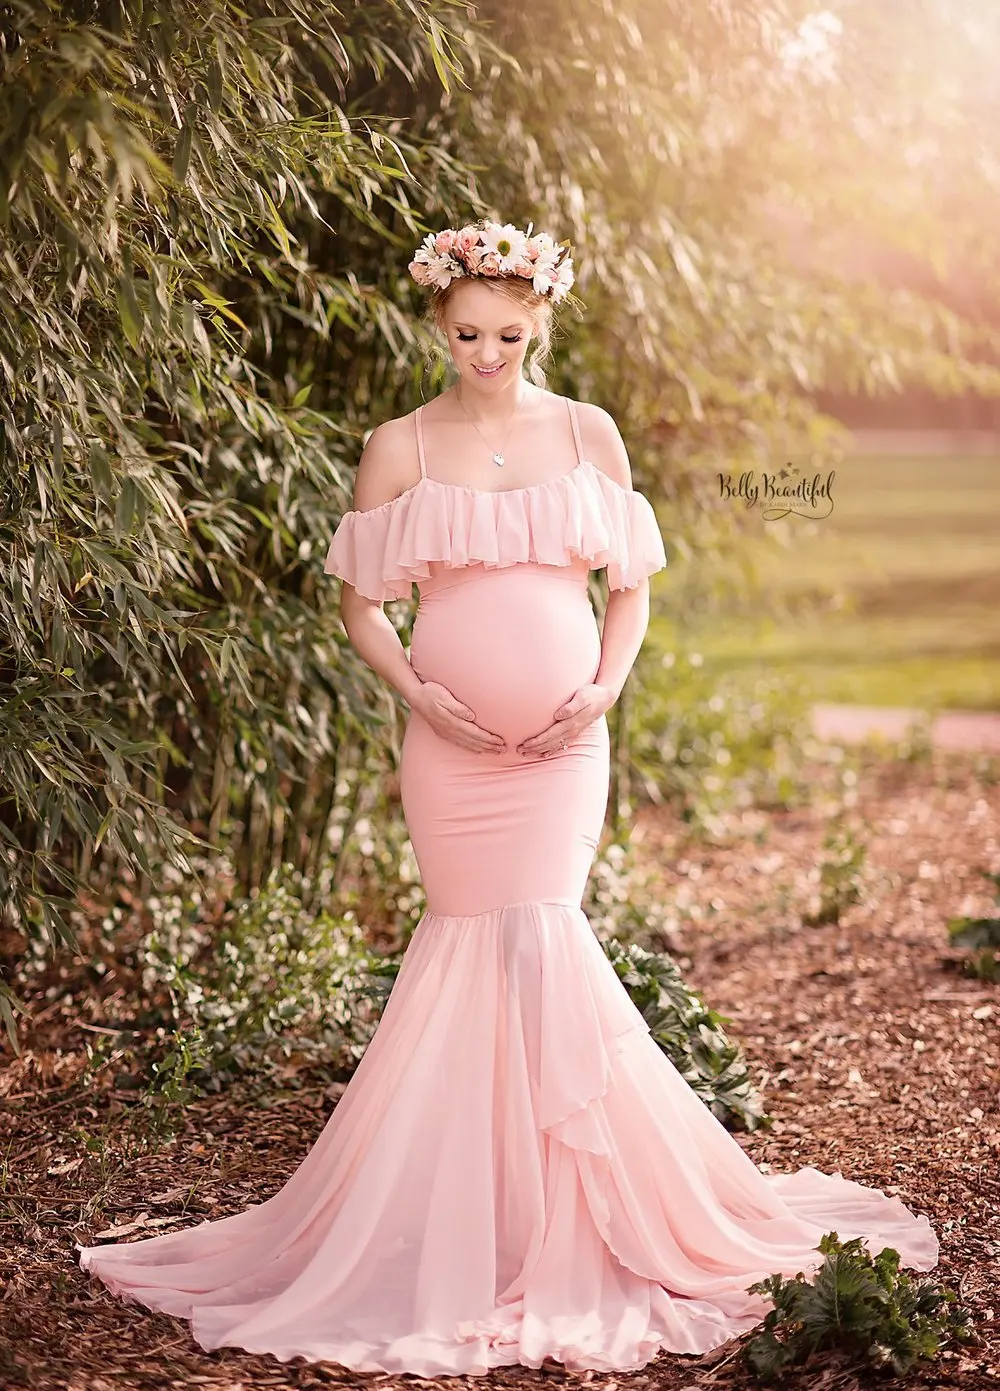 2019 Mermaid Maternity Dresses For Photo Shoot Chiffon Women Pregnancy Dress Photography Props Sexy Off Shoulder Maternity Gown (8)